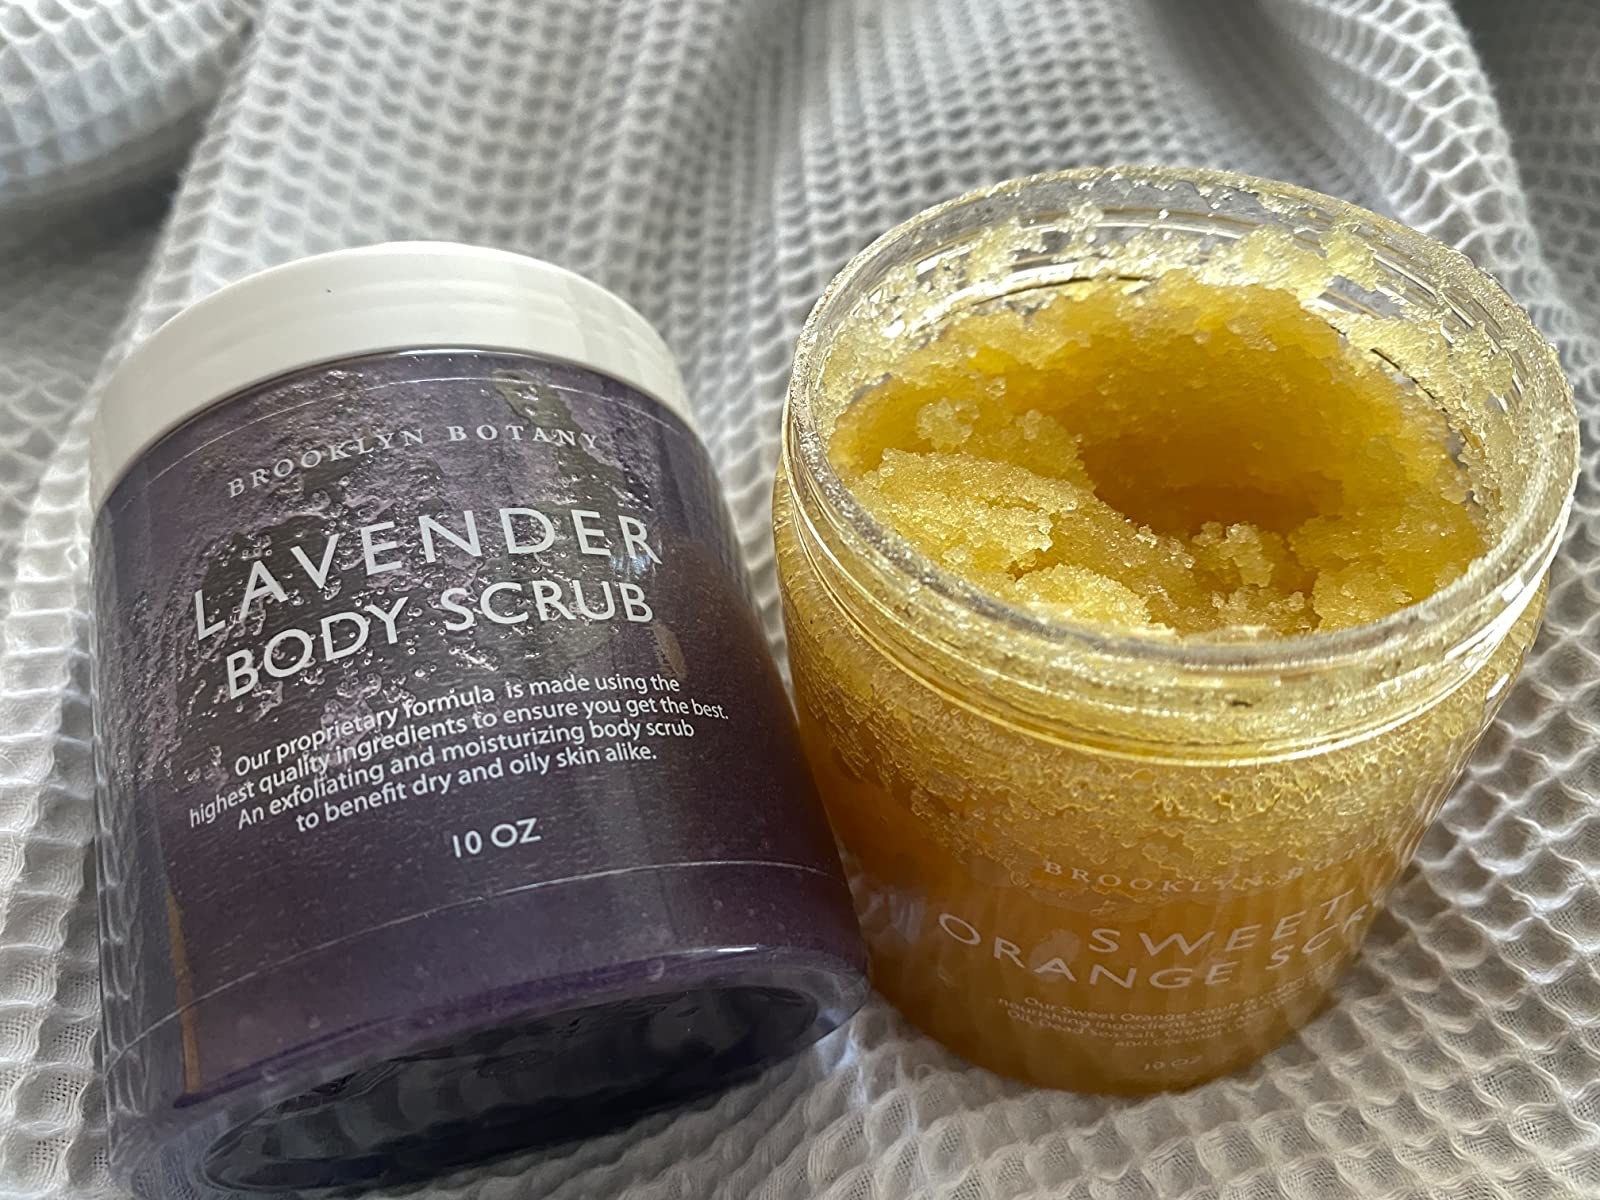 Reviewer image of body scrubs